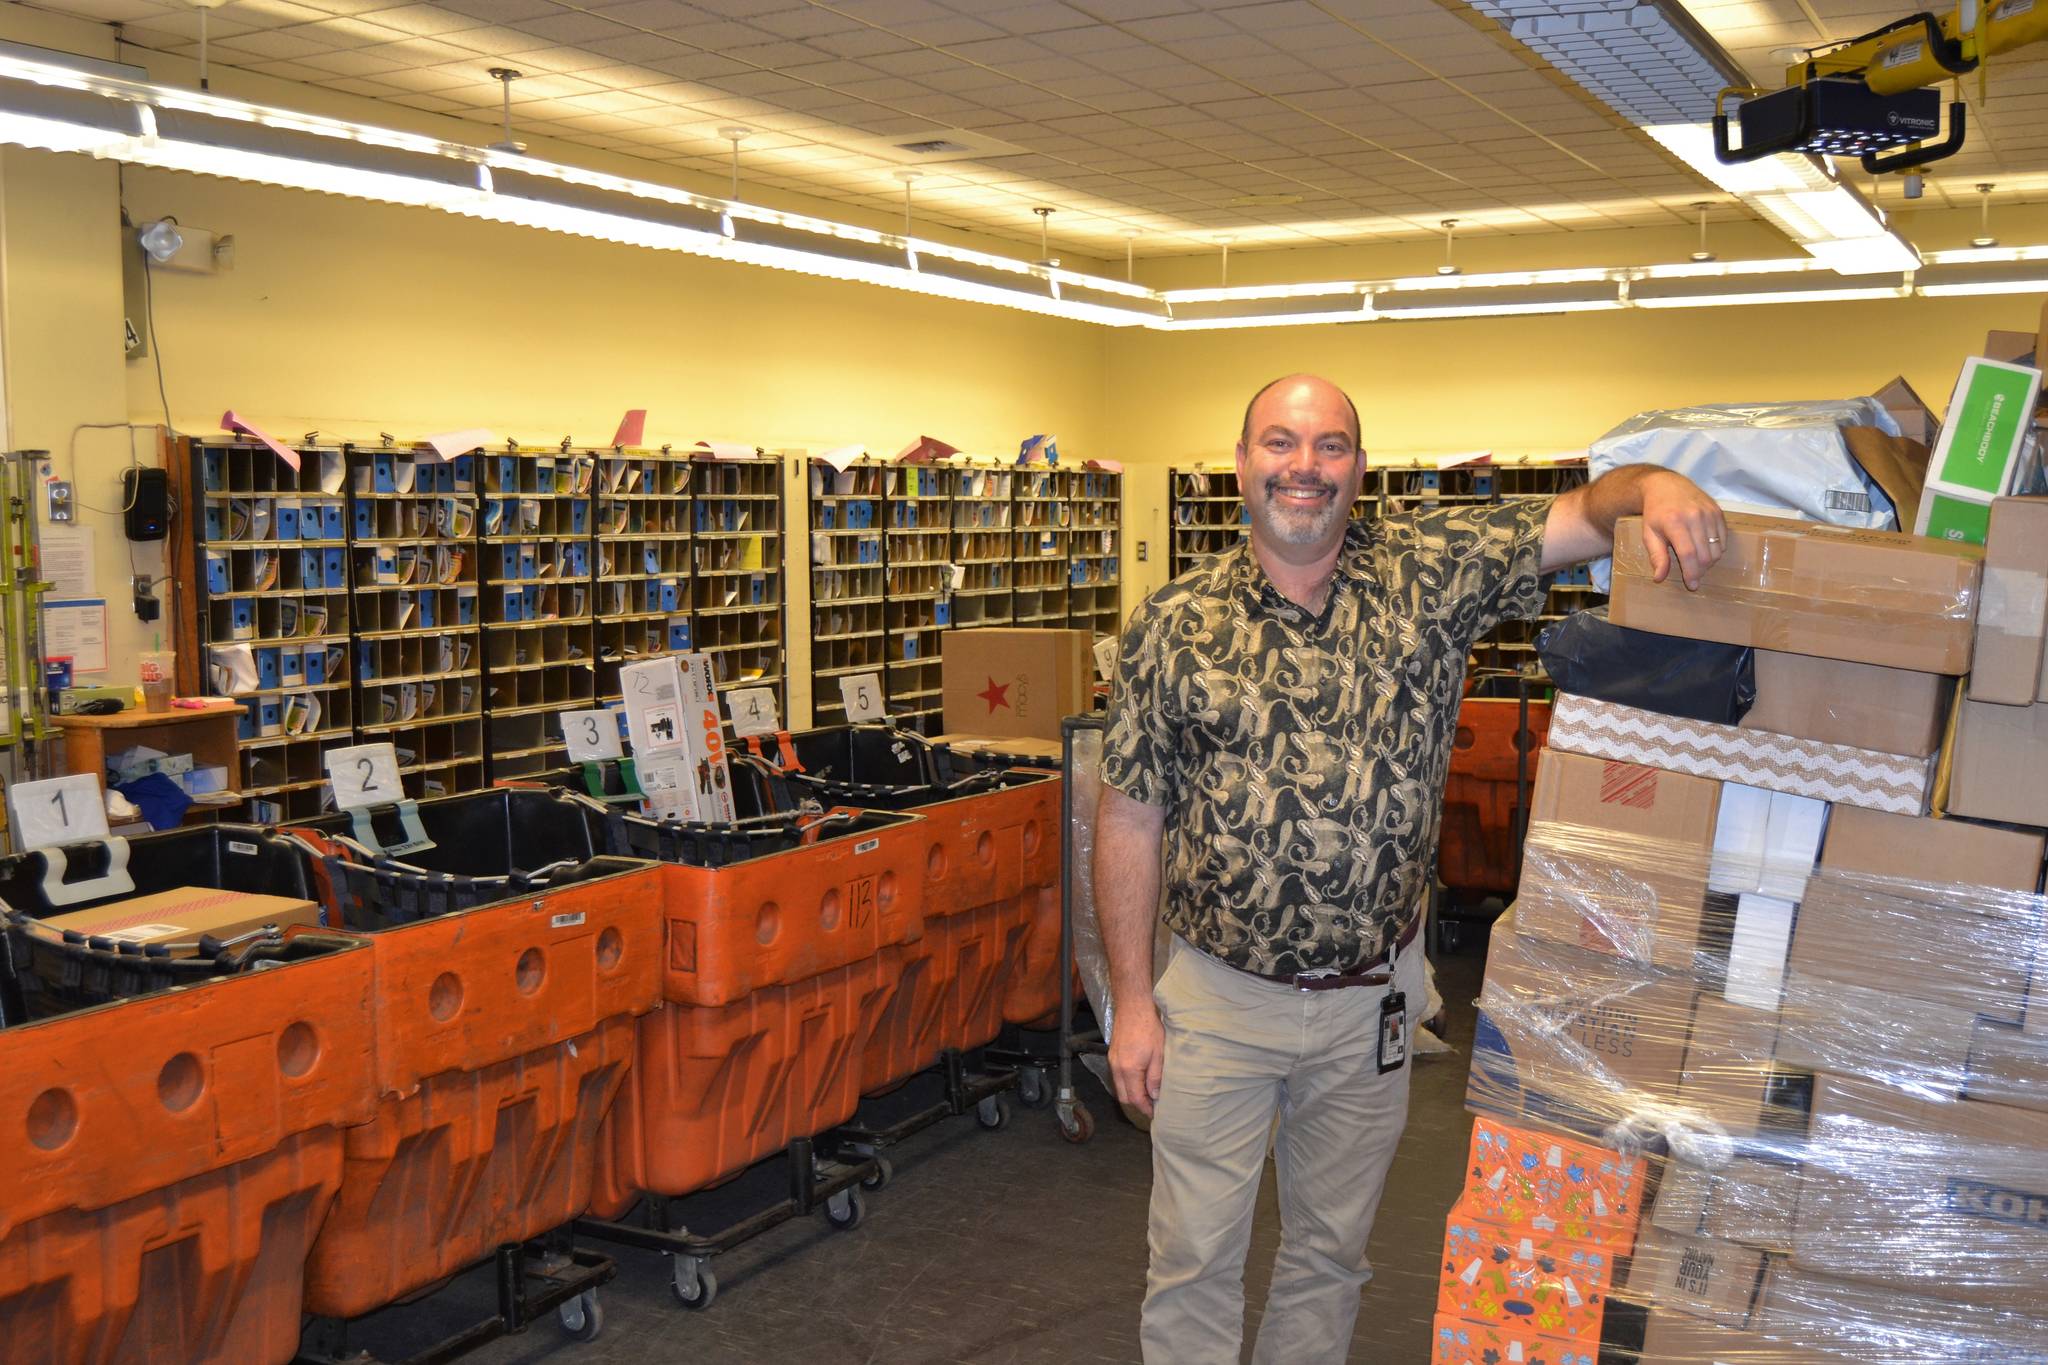 Sequim Postmaster Rob Garfinkle oversees about 15,000 residents’ mail through the Sequim Post Office. “The people here have been great here,” he said. “This is a great team and I’m glad to be part of it.” Sequim Gazette photo by Matthew Nash